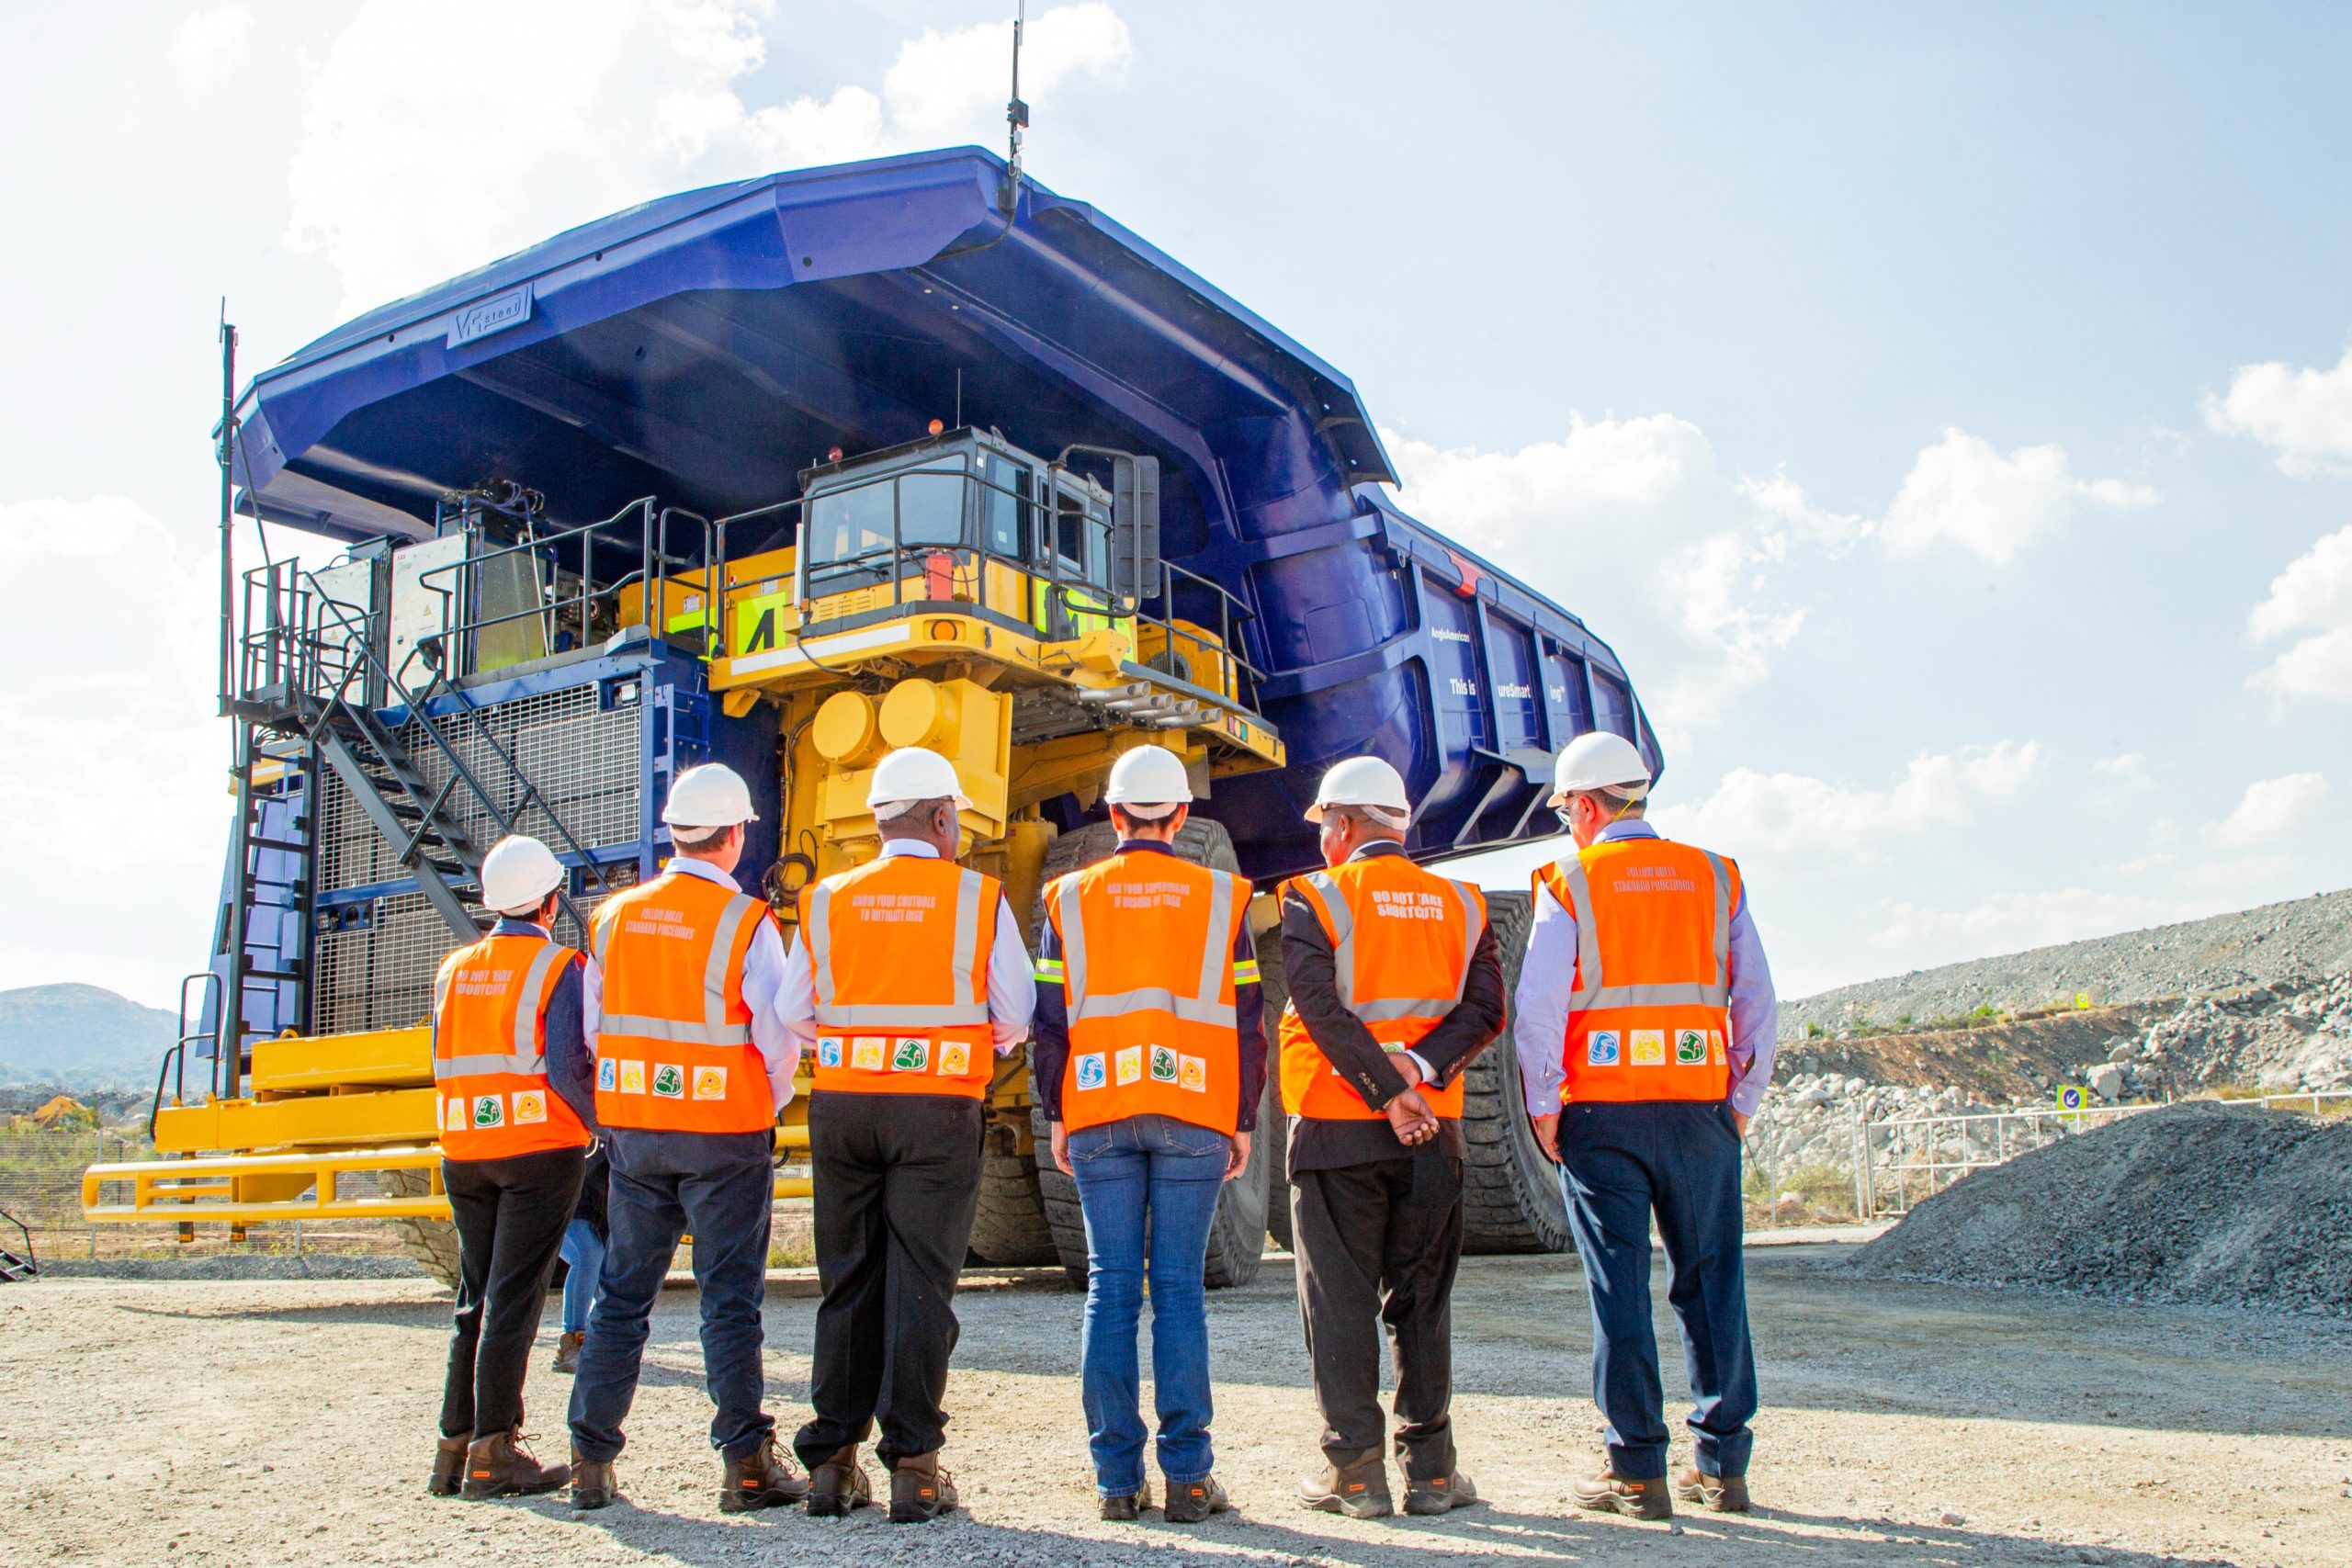 Anglo American to formalise First Mode partnership as part of zero